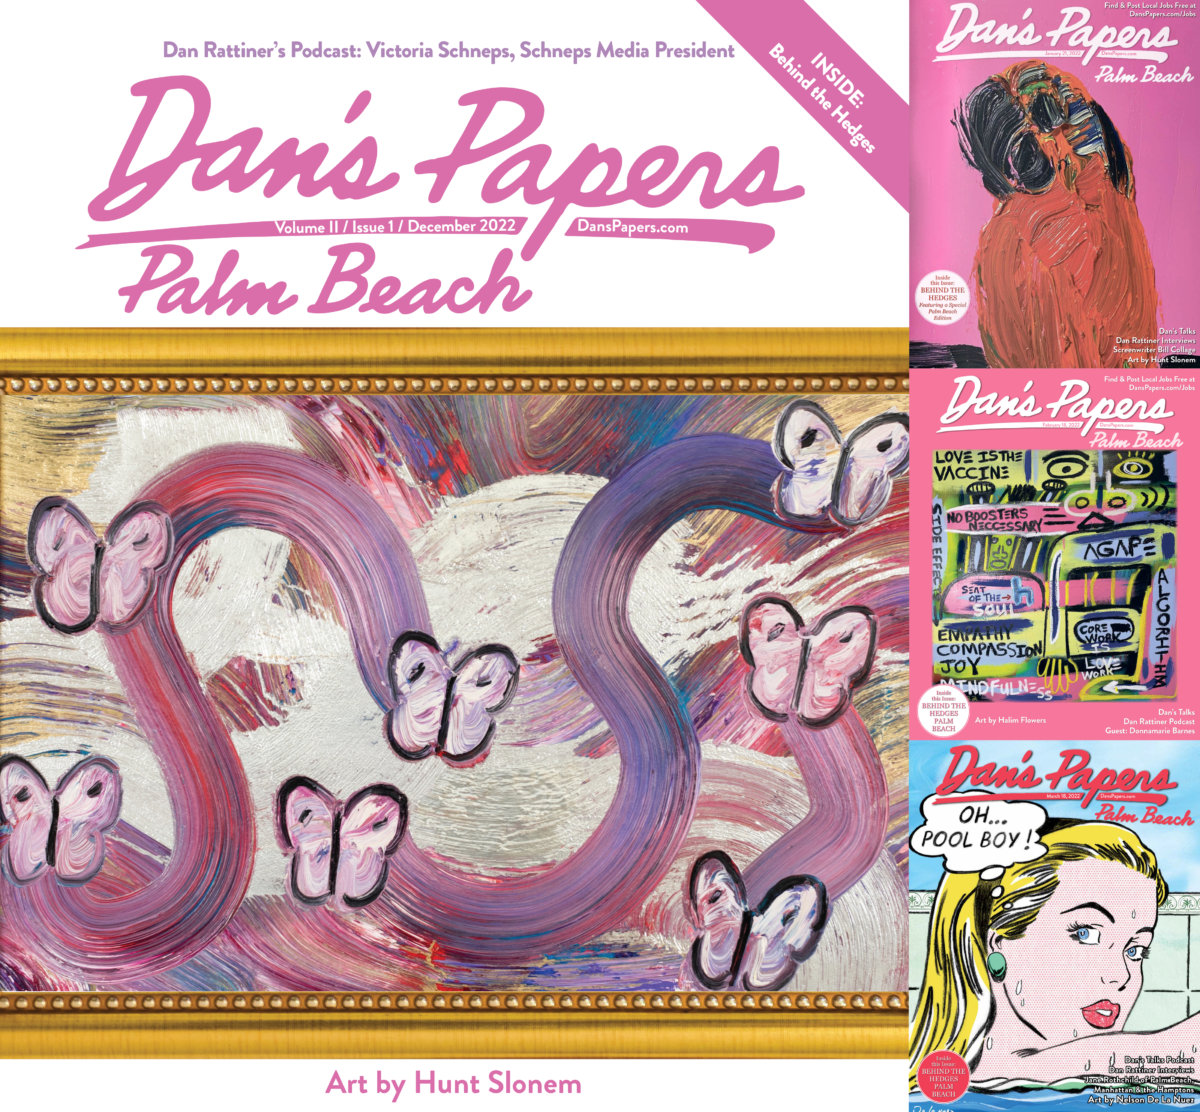 The December 2022 issue marks the fourth Dan's Papers Palm Beach issue to date.